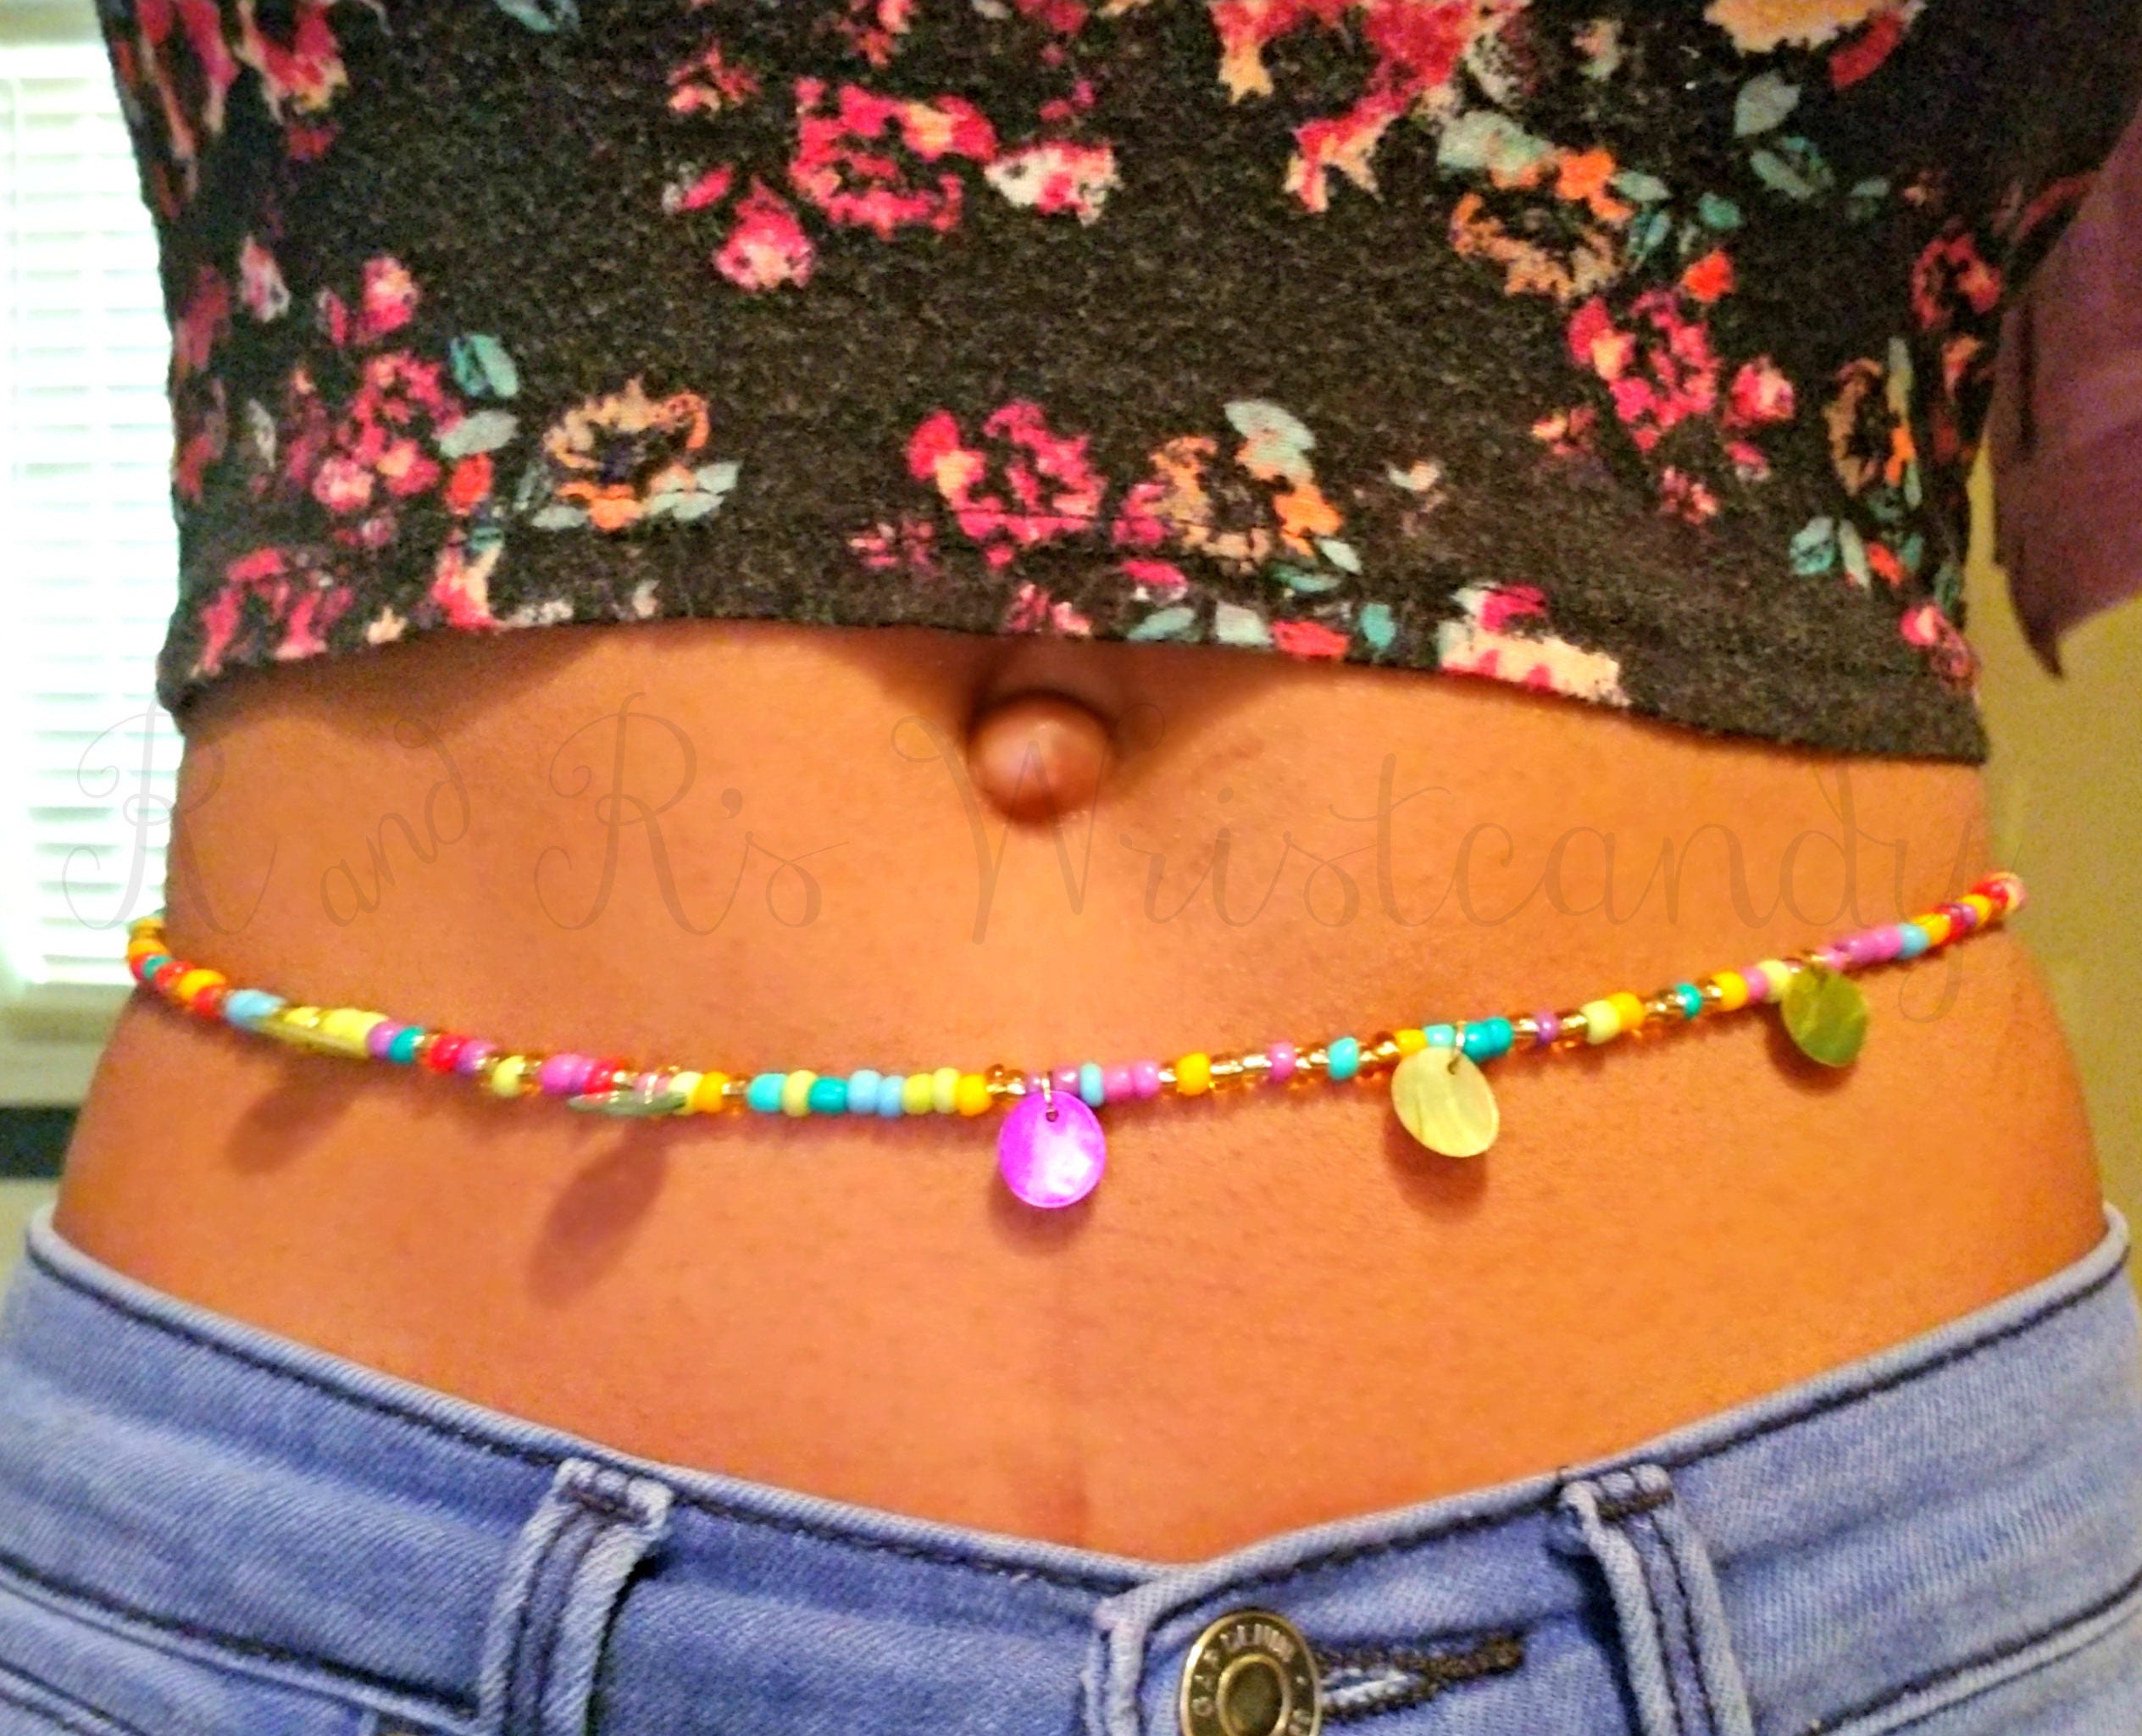 Details about   Beaded Waist Beads Body Jewelry Belly African Chain Beads Waist Colors X1P9 